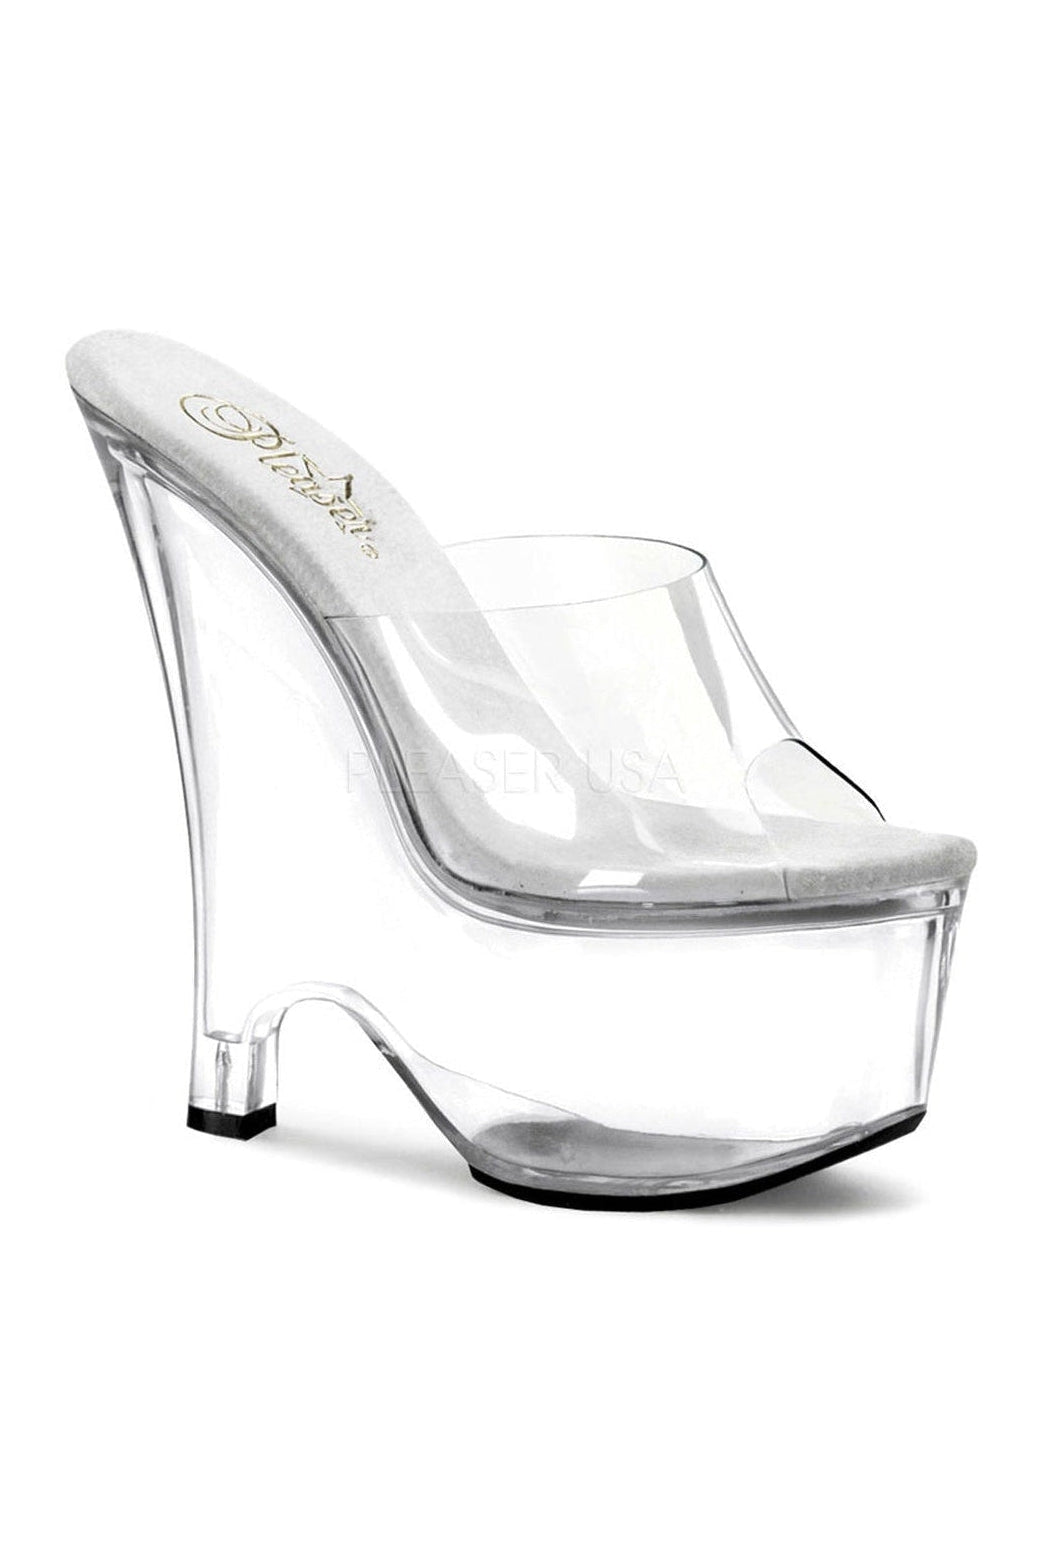 Pleaser Clear Wedges Platform Stripper Shoes | Buy at Sexyshoes.com